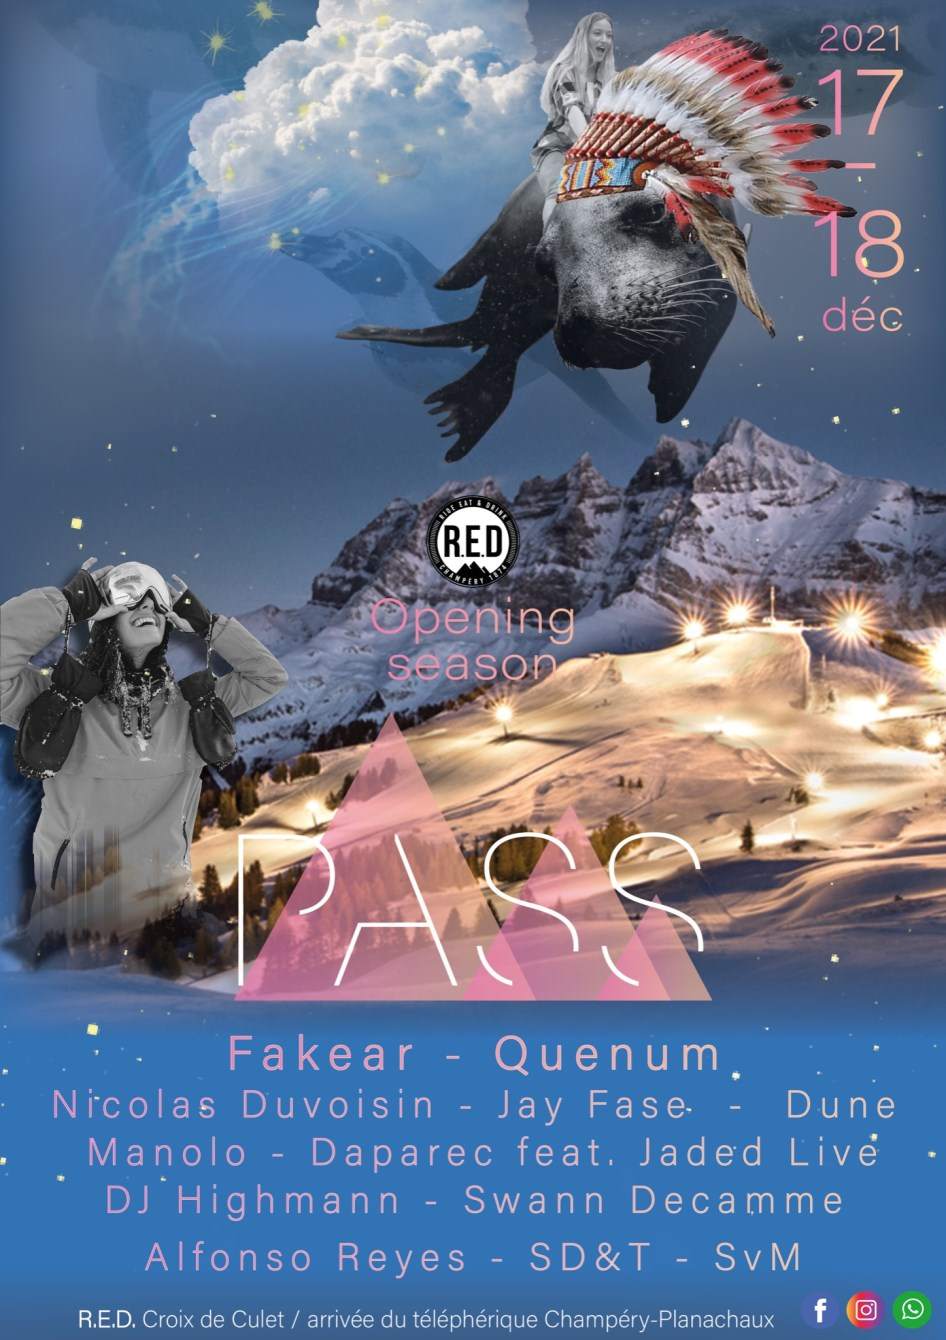 PASS Opening Week-end - Fakear, Quenum and Many More - フライヤー表